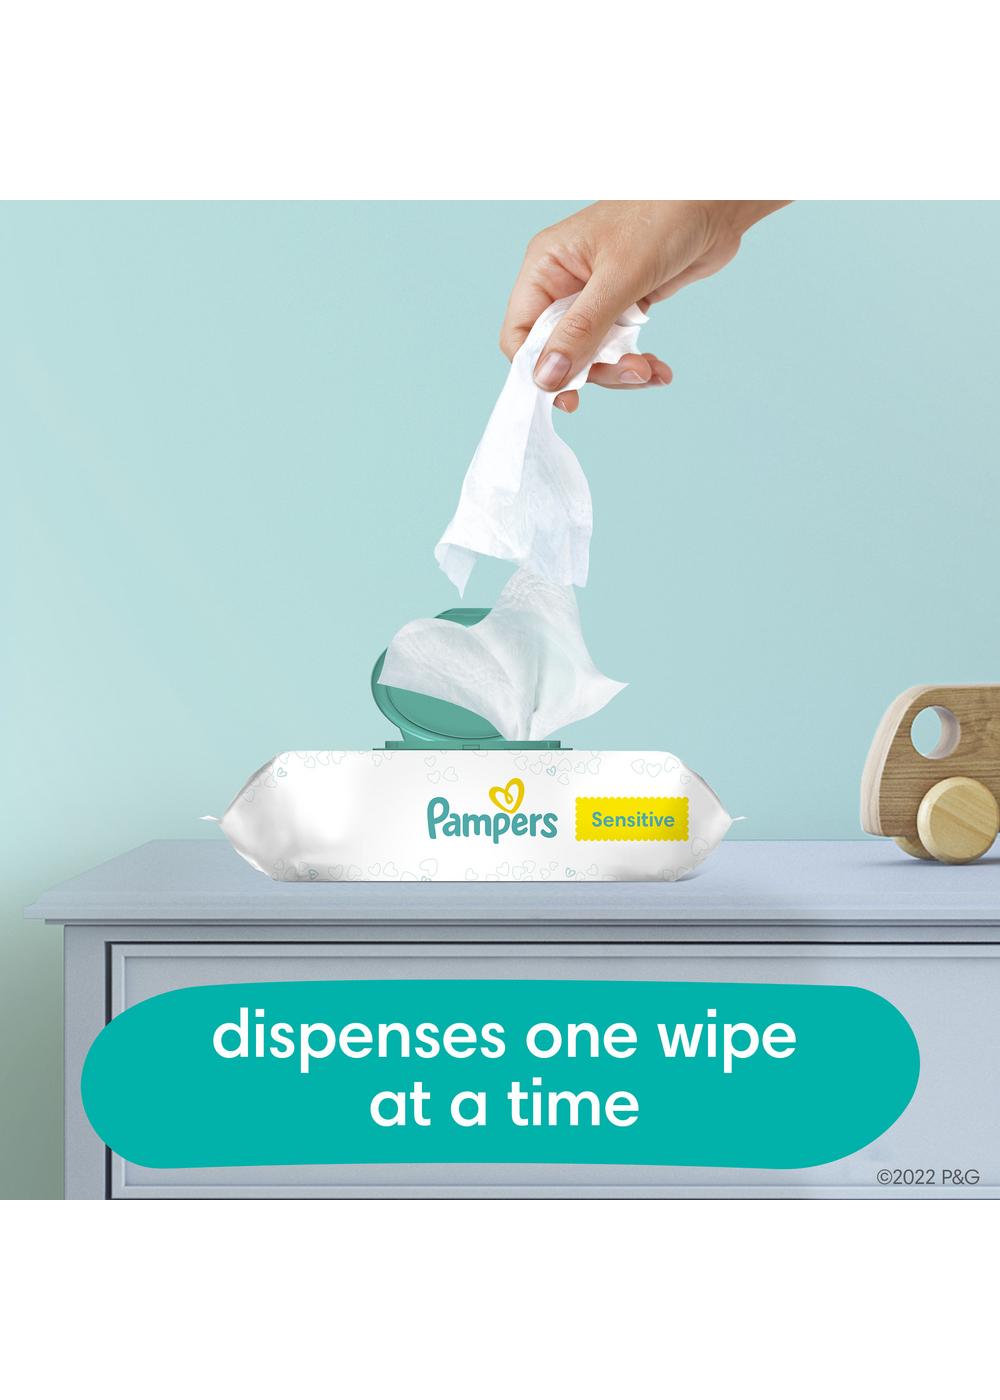 Pampers Sensitive Skin Baby Wipes 7 Pk; image 4 of 9